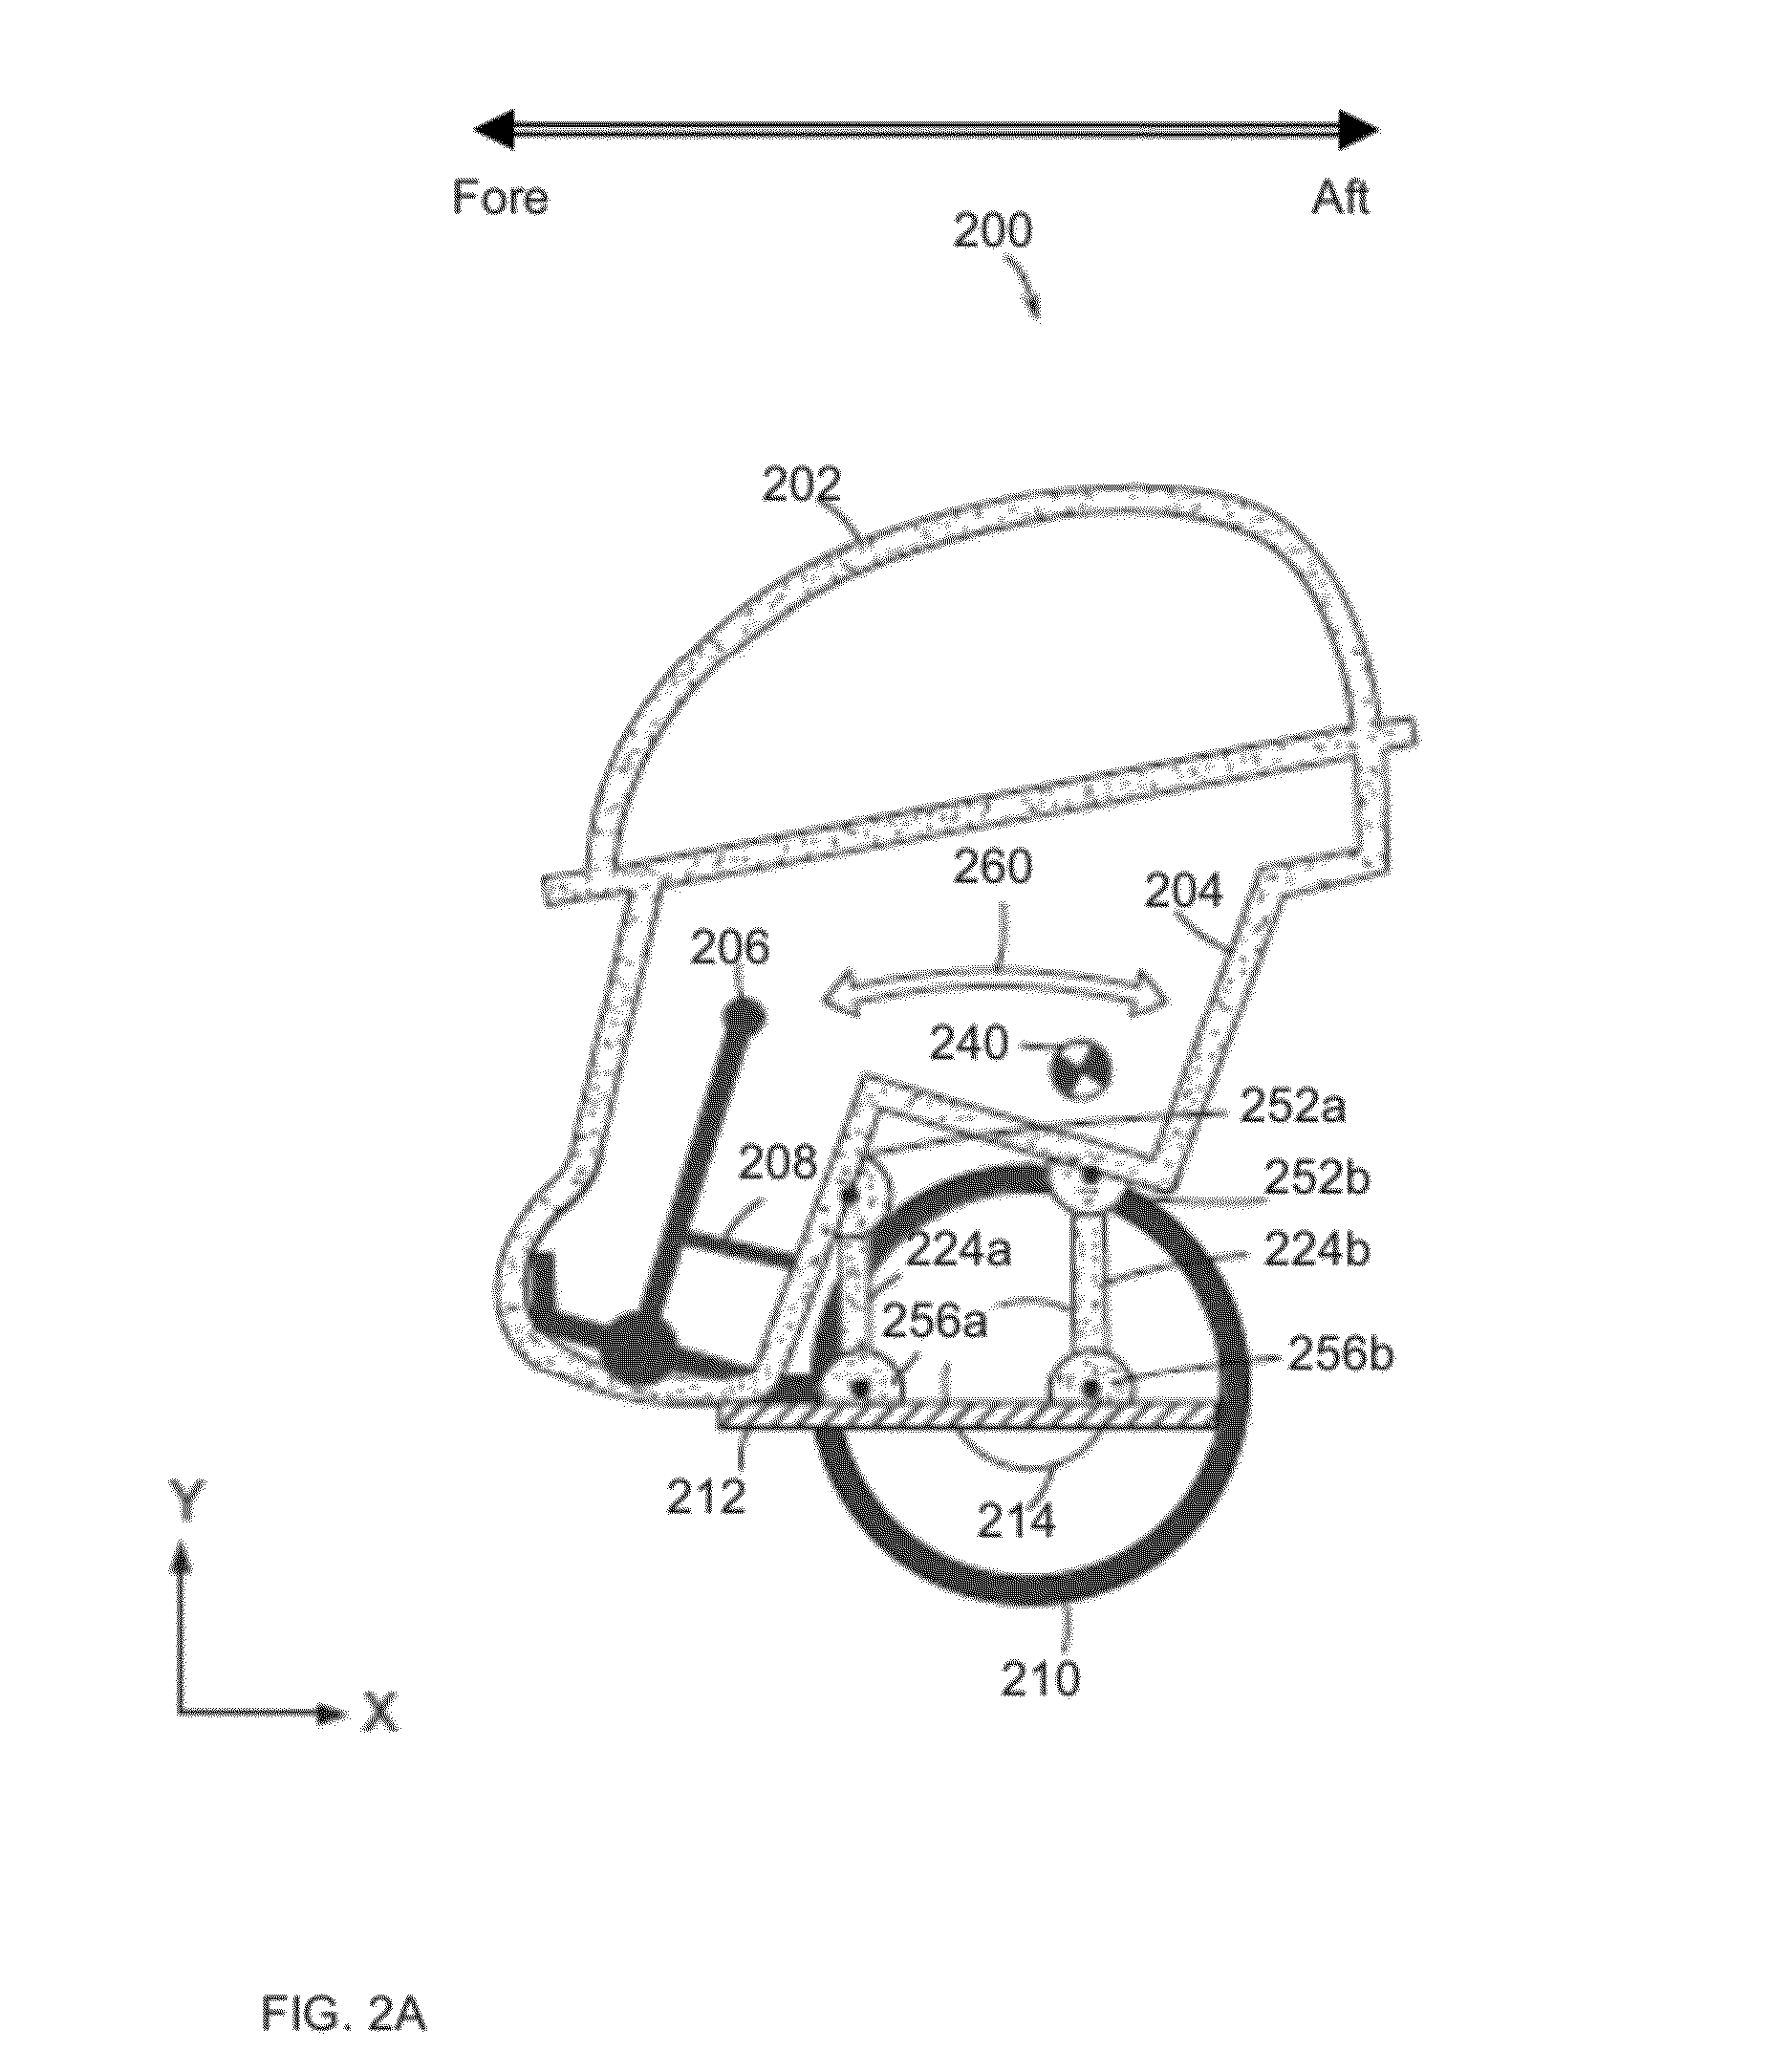 Apparatus and methods for control of a vehicle